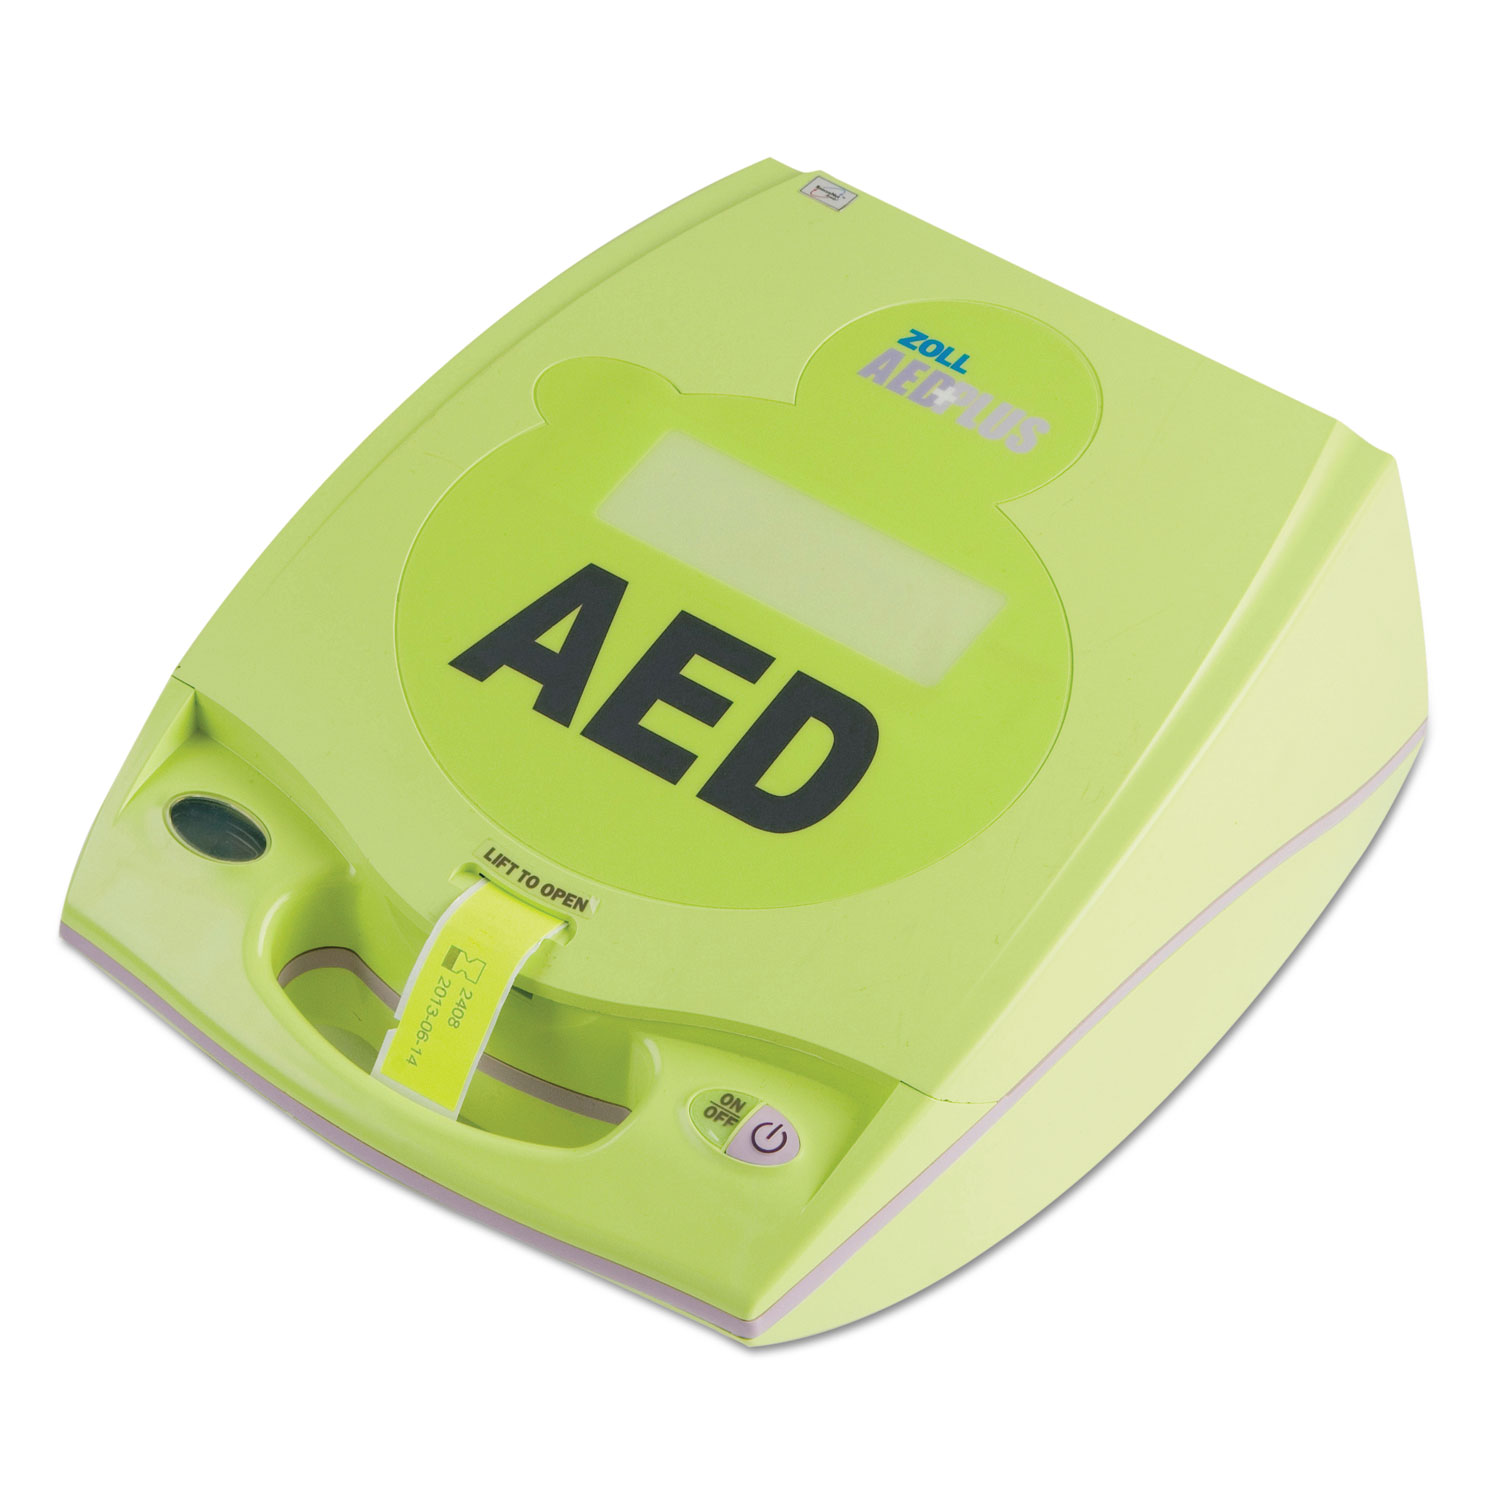  ZOLL 800000400701 AED Plus Fully Automatic External Defibrillator (ZOL800000400701) 